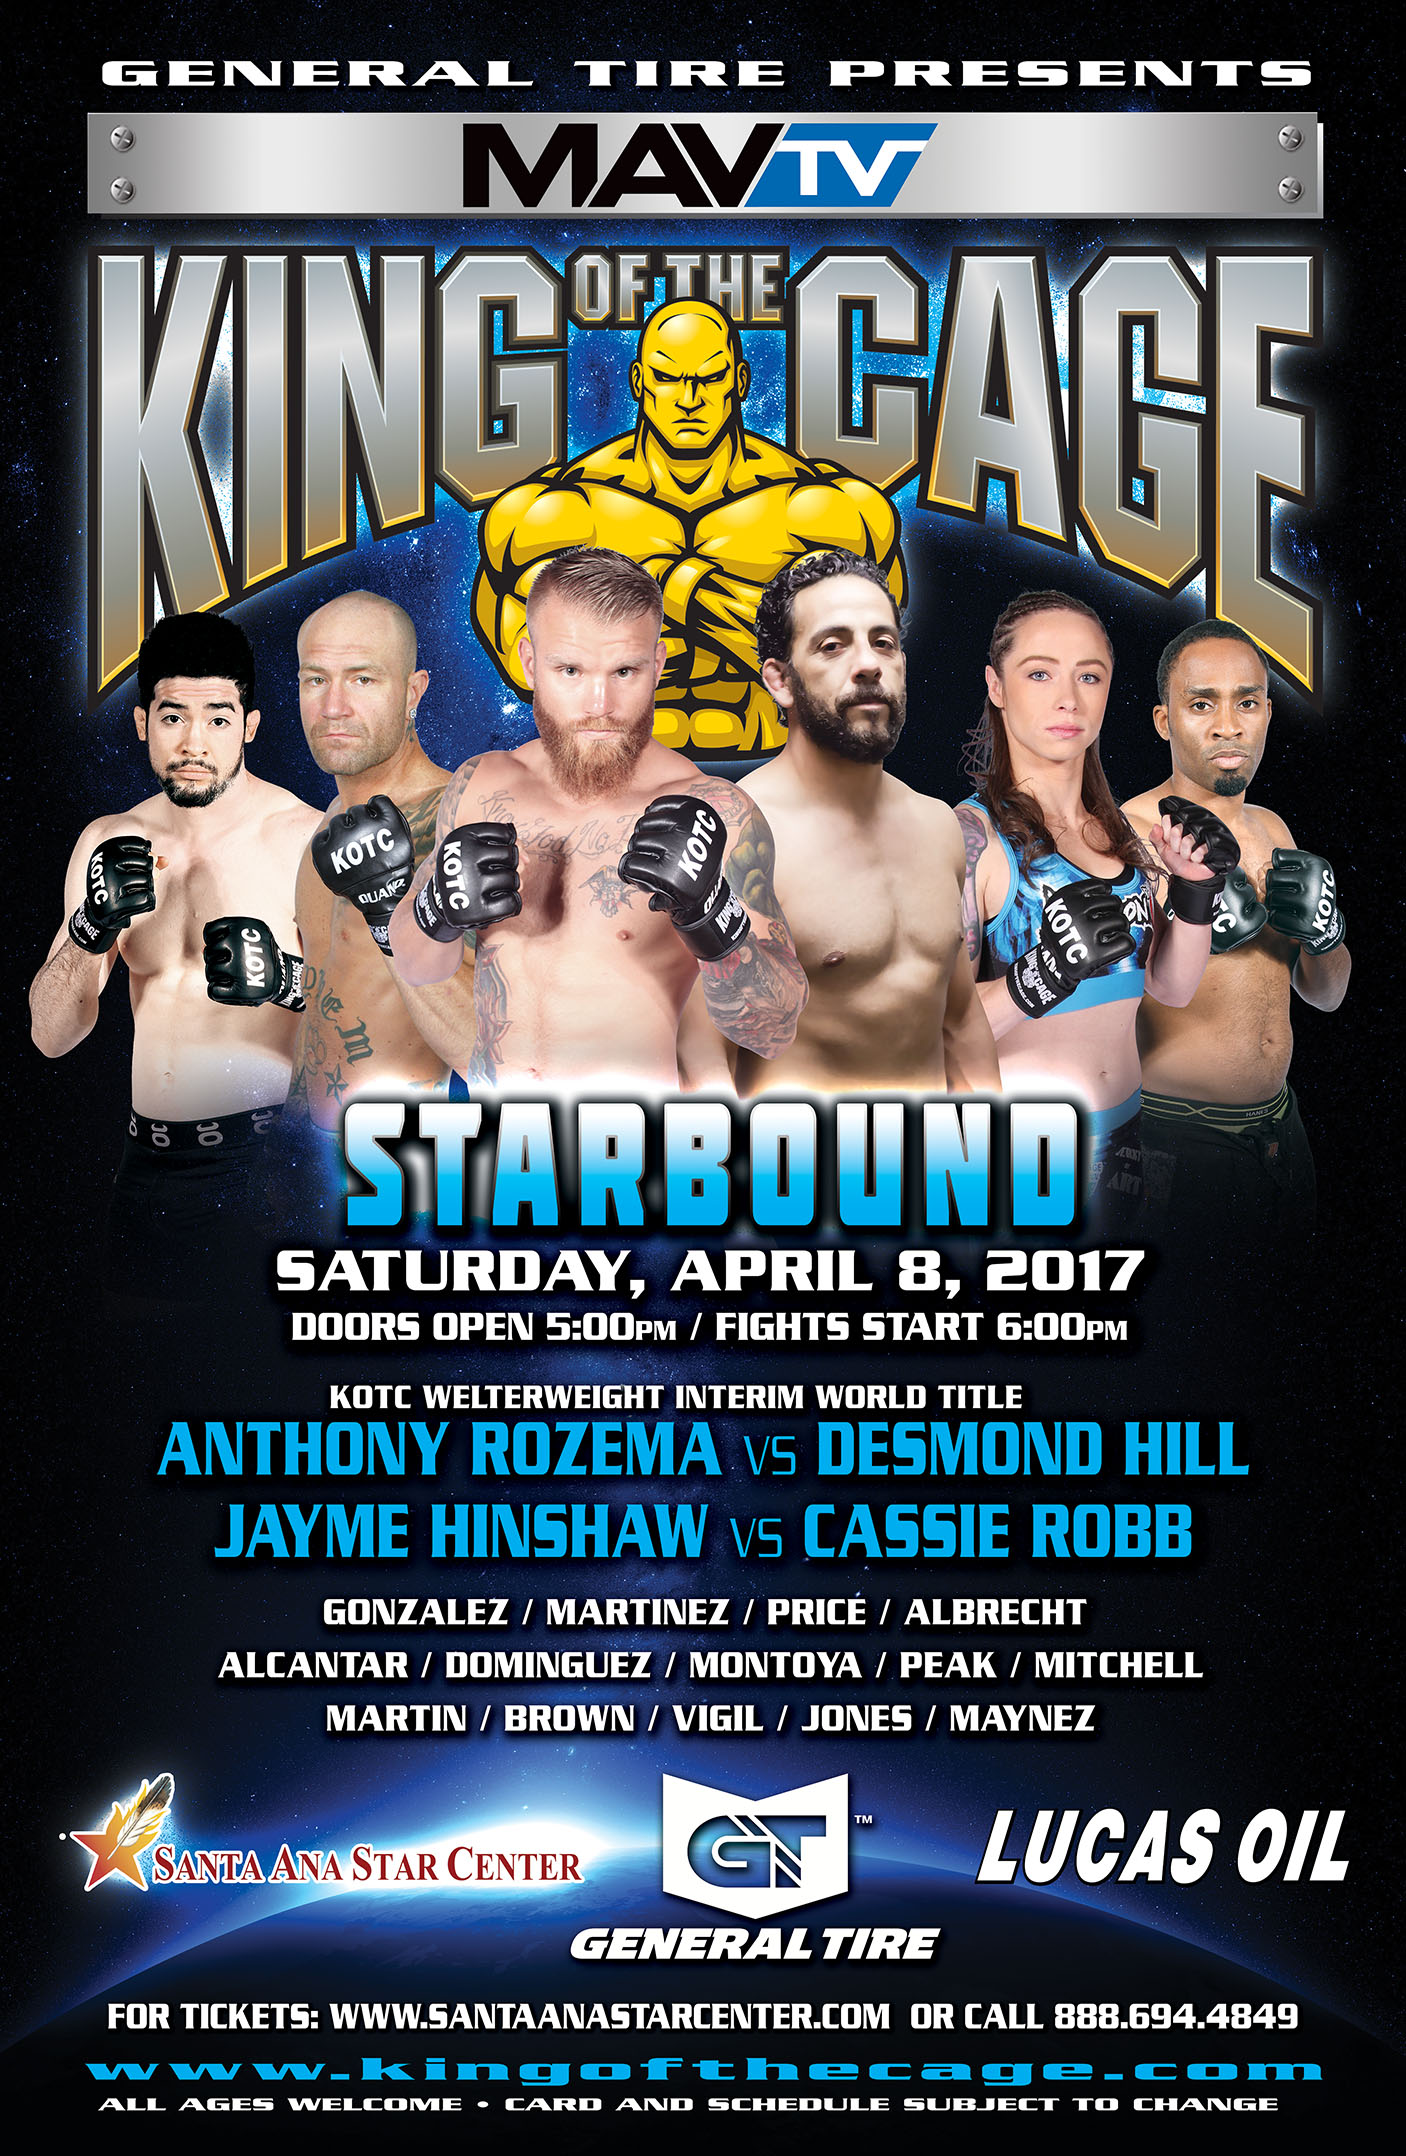 King of the Cage Returns to New Mexico at Santa Ana Star Center on April 8 for “STARBOUND”